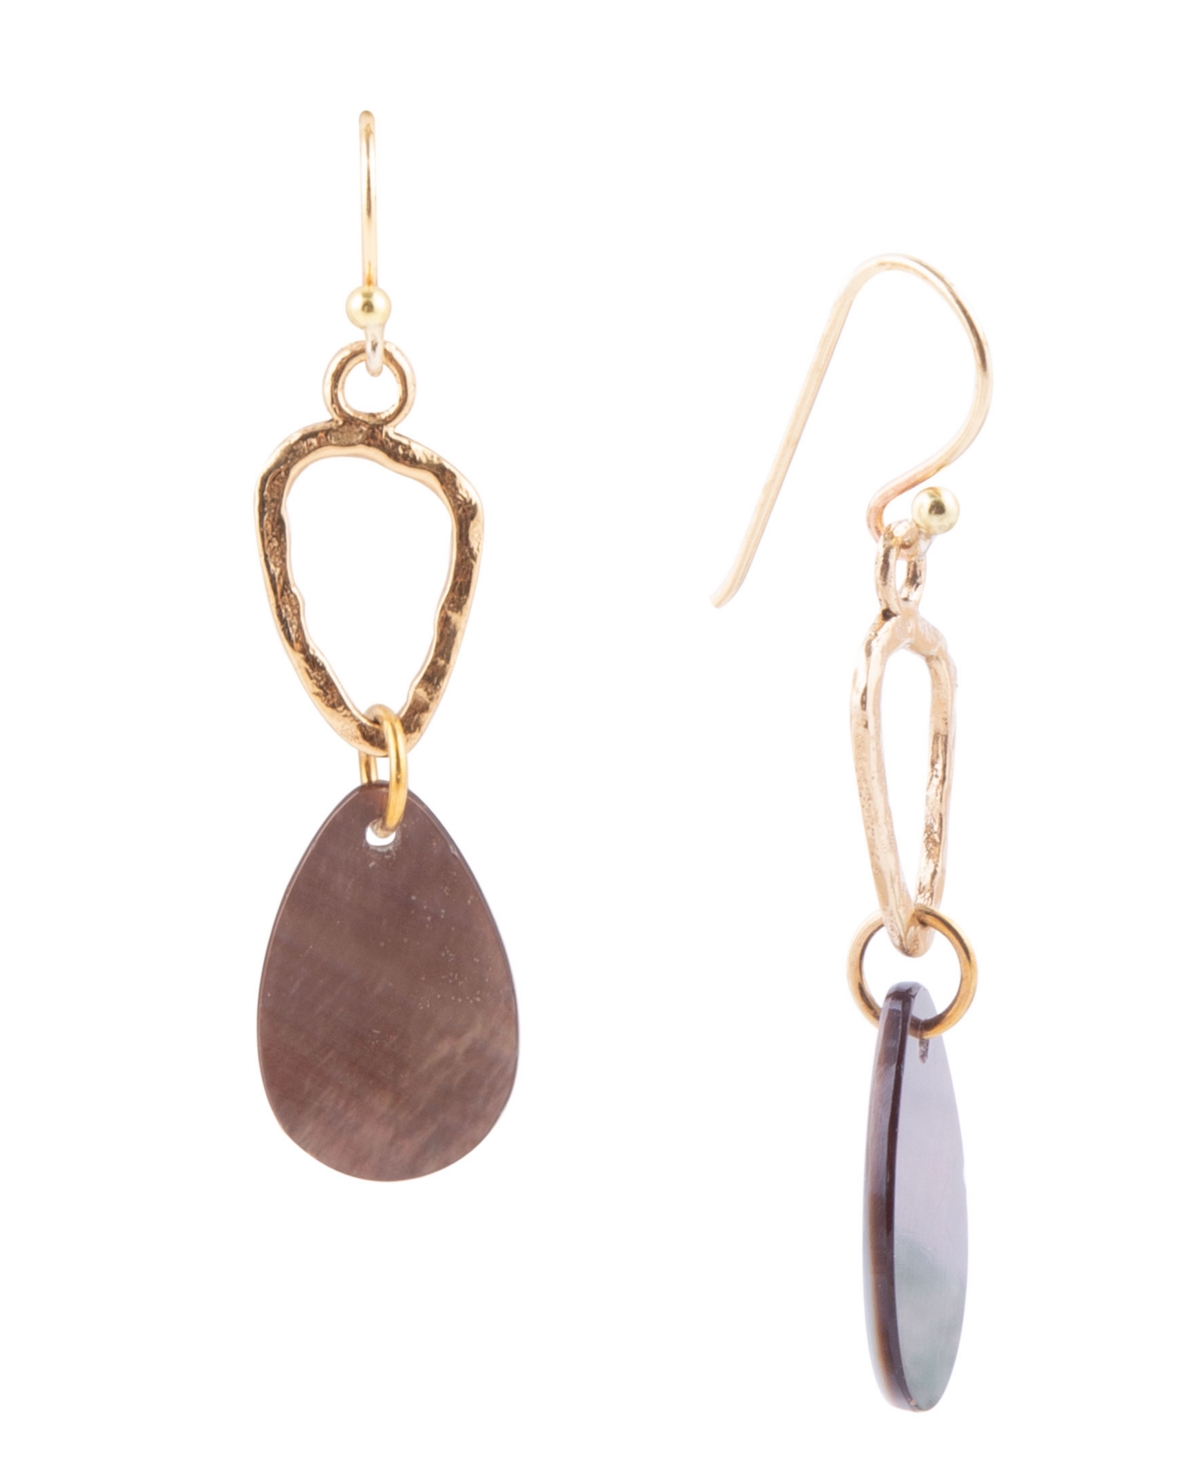 Rose Bronze and Genuine Black Mother-of-Pearl Drop Earrings - Genuine Mother-of-Pearl